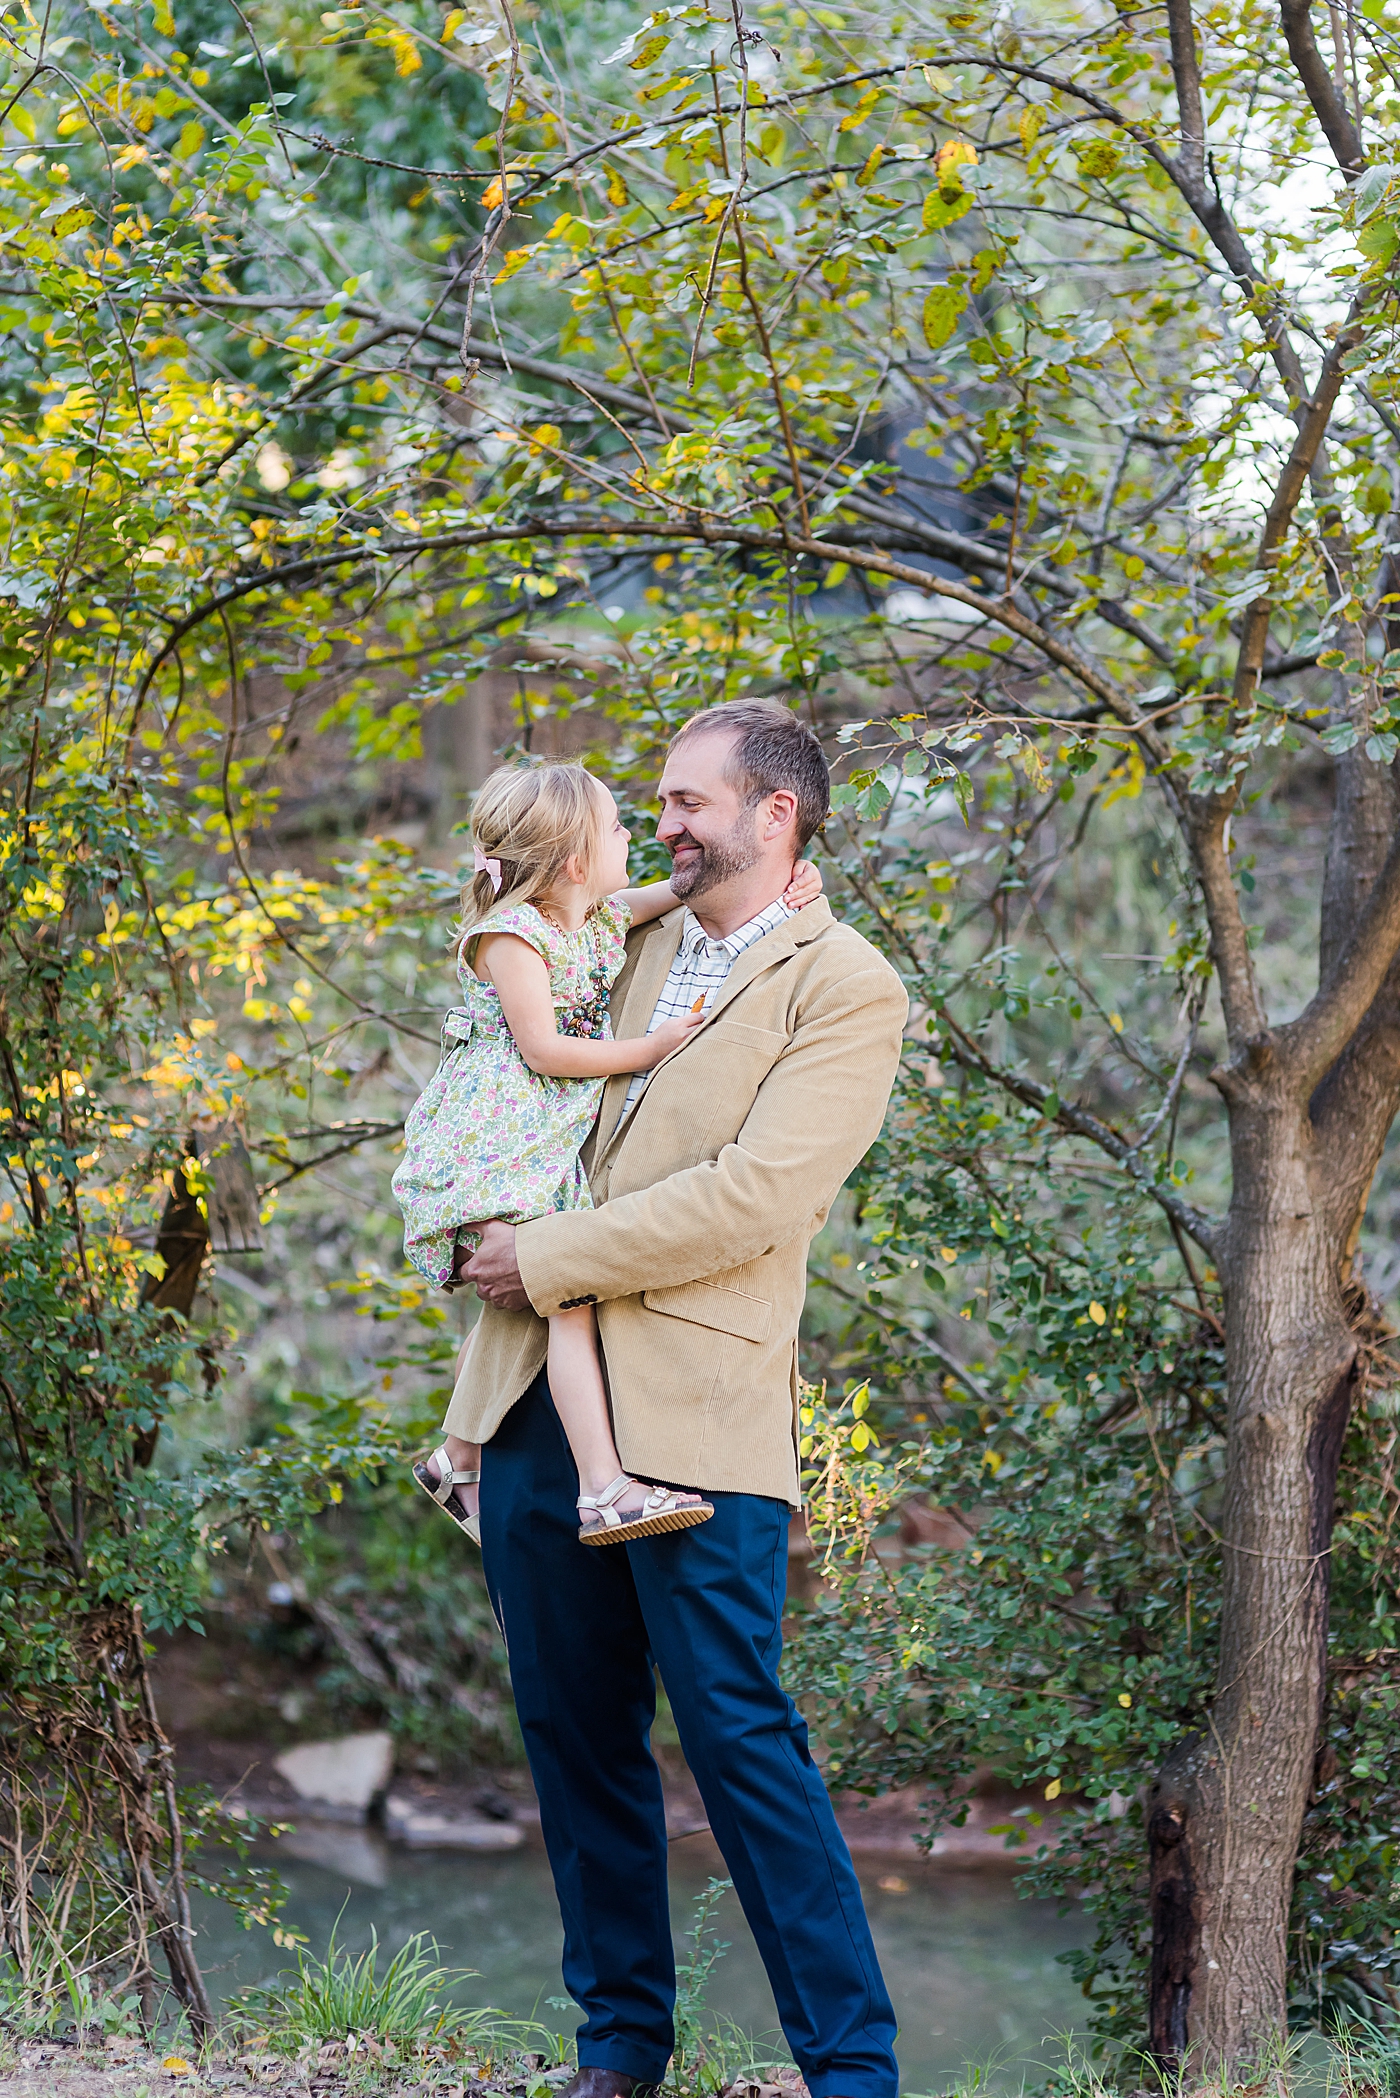 Daddy and daughter interacting in the park | Photo by Charlotte Family Photographer Anna Wisjo